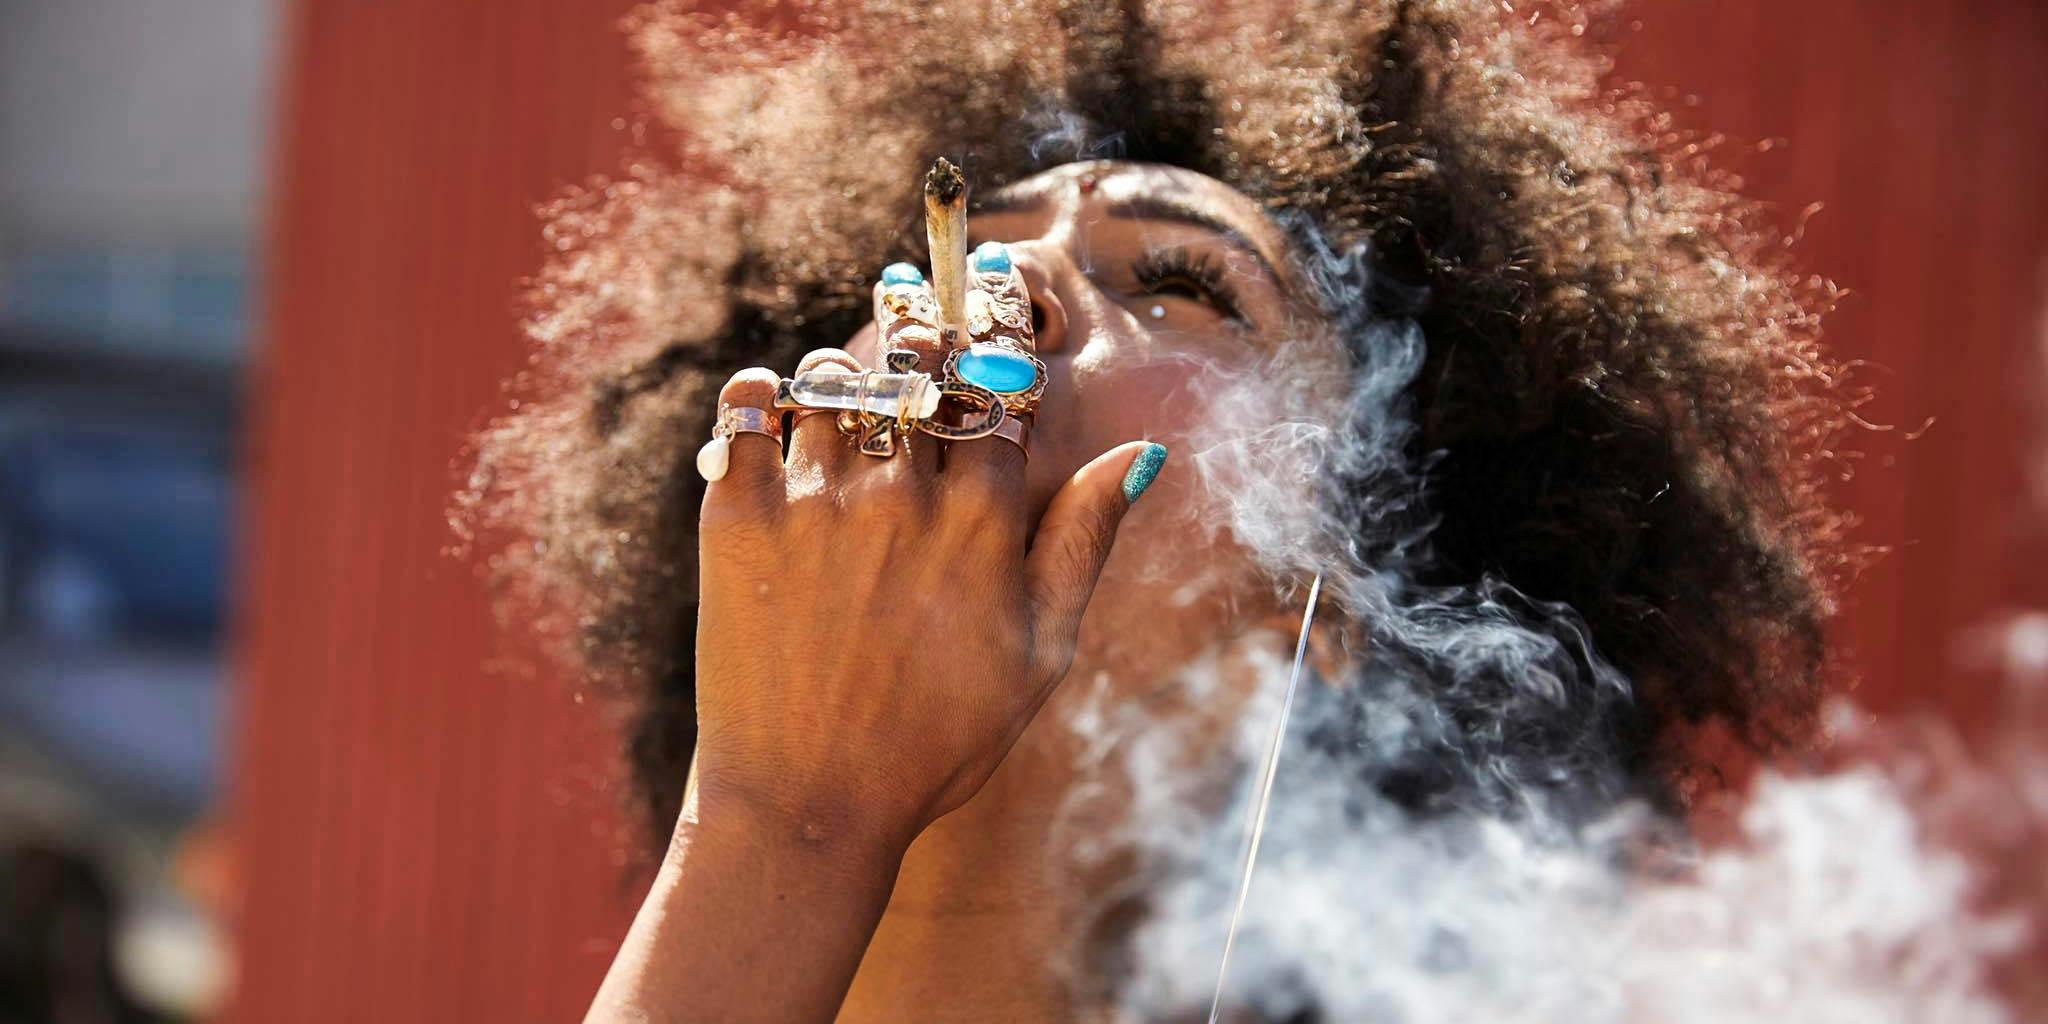 A woman smokes a joint. Many women in cannabis are using social media to spread their message and break stigmas.